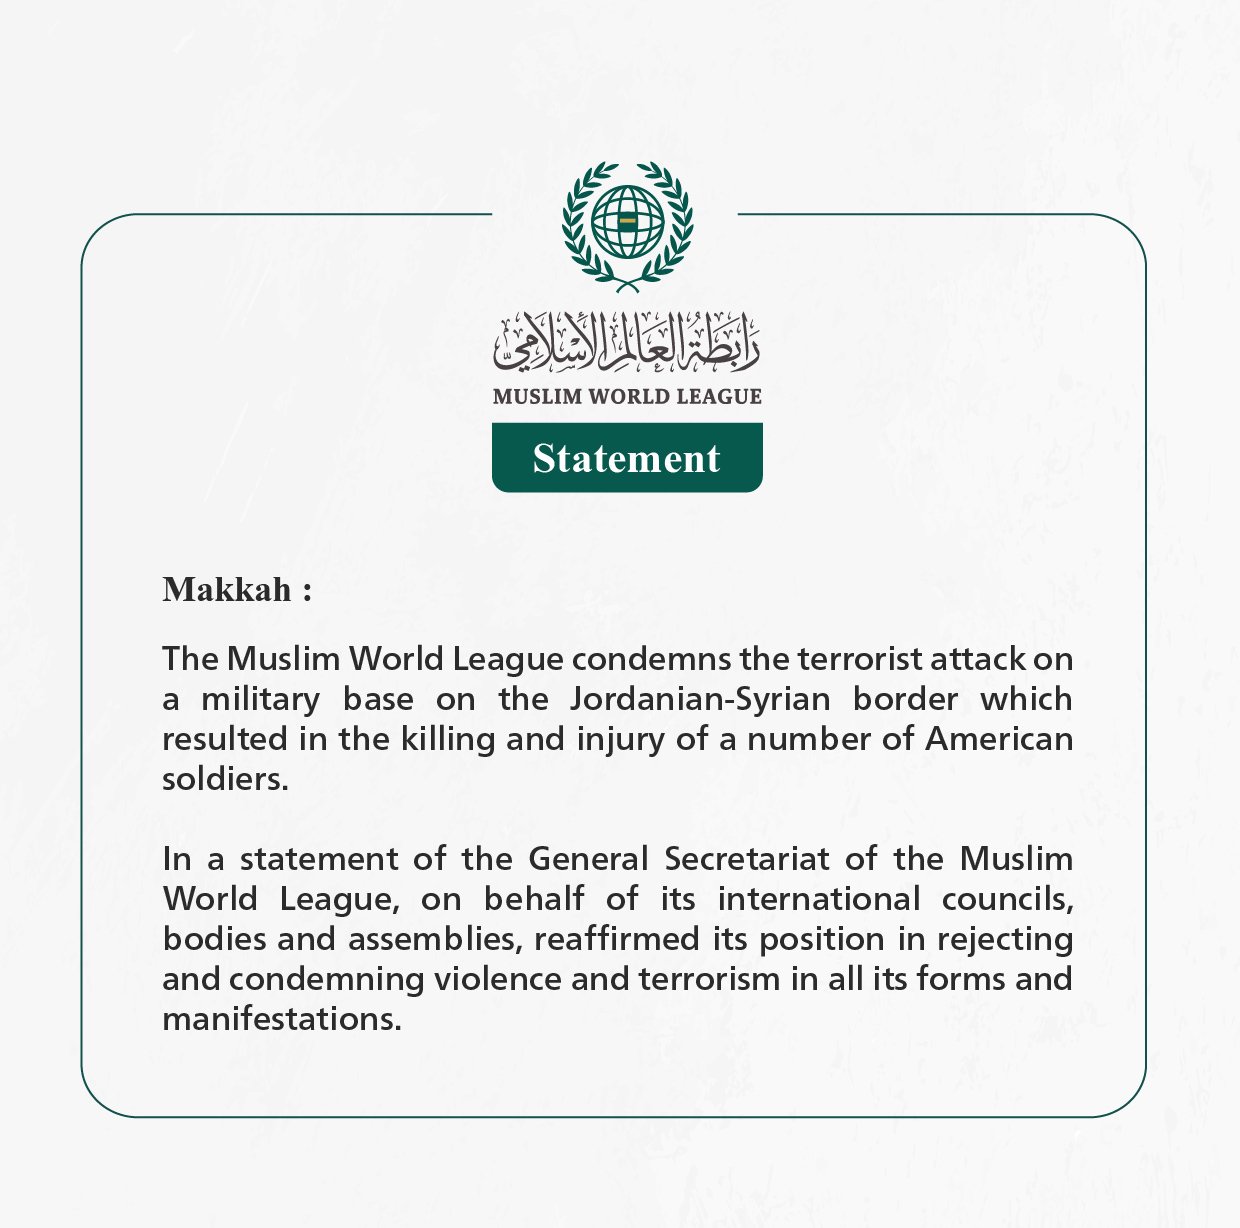 Statement About the Terrorist Attack on a Military Base on the Jordanian-Syrian Border